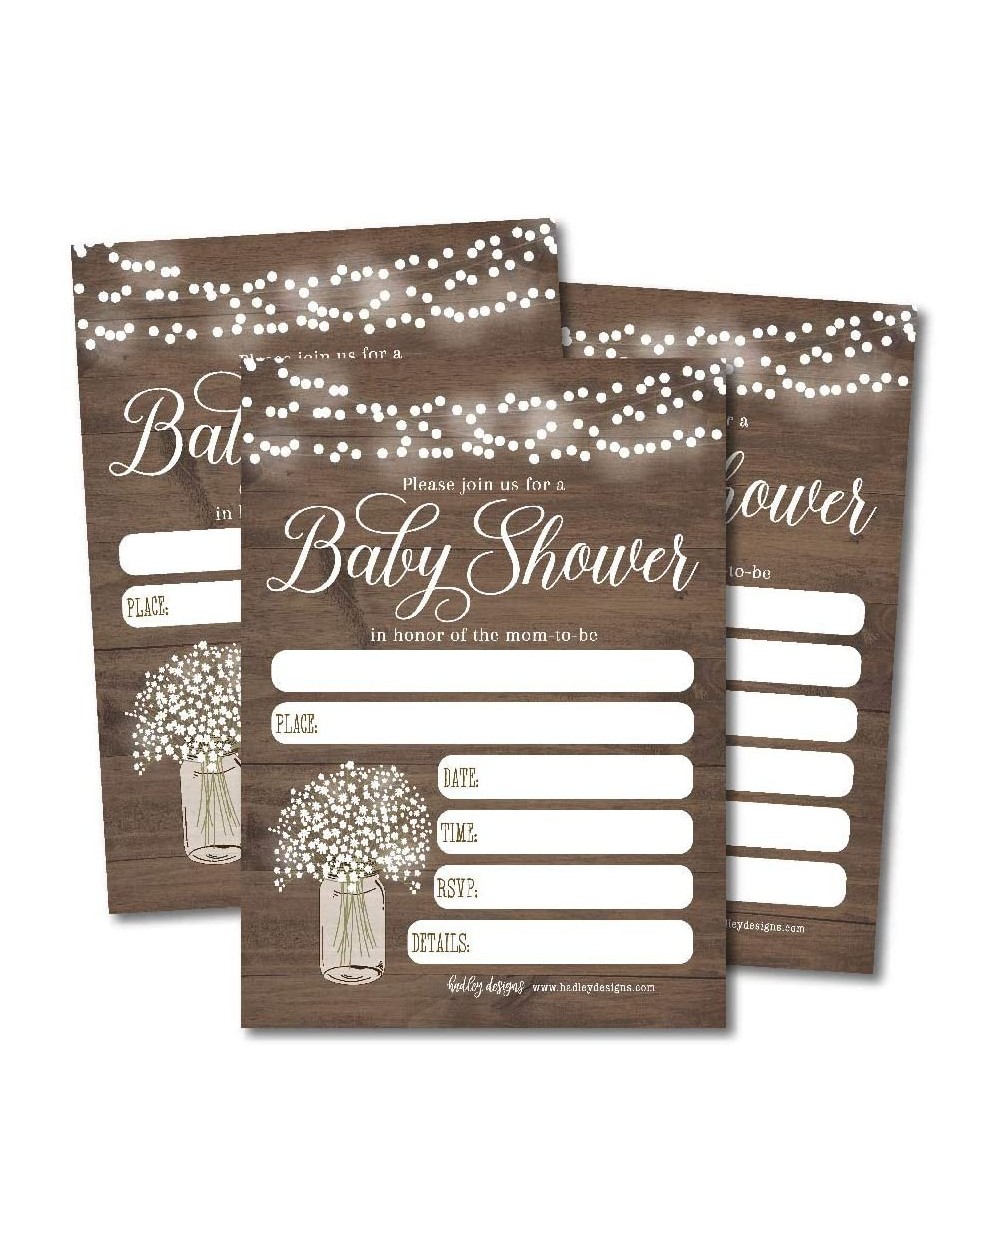 Invitations 25 Rustic Floral Baby Shower Invitations- Sprinkle Invite for boy or Girl- Gender Neutral Reveal Wood Lights- Cut...